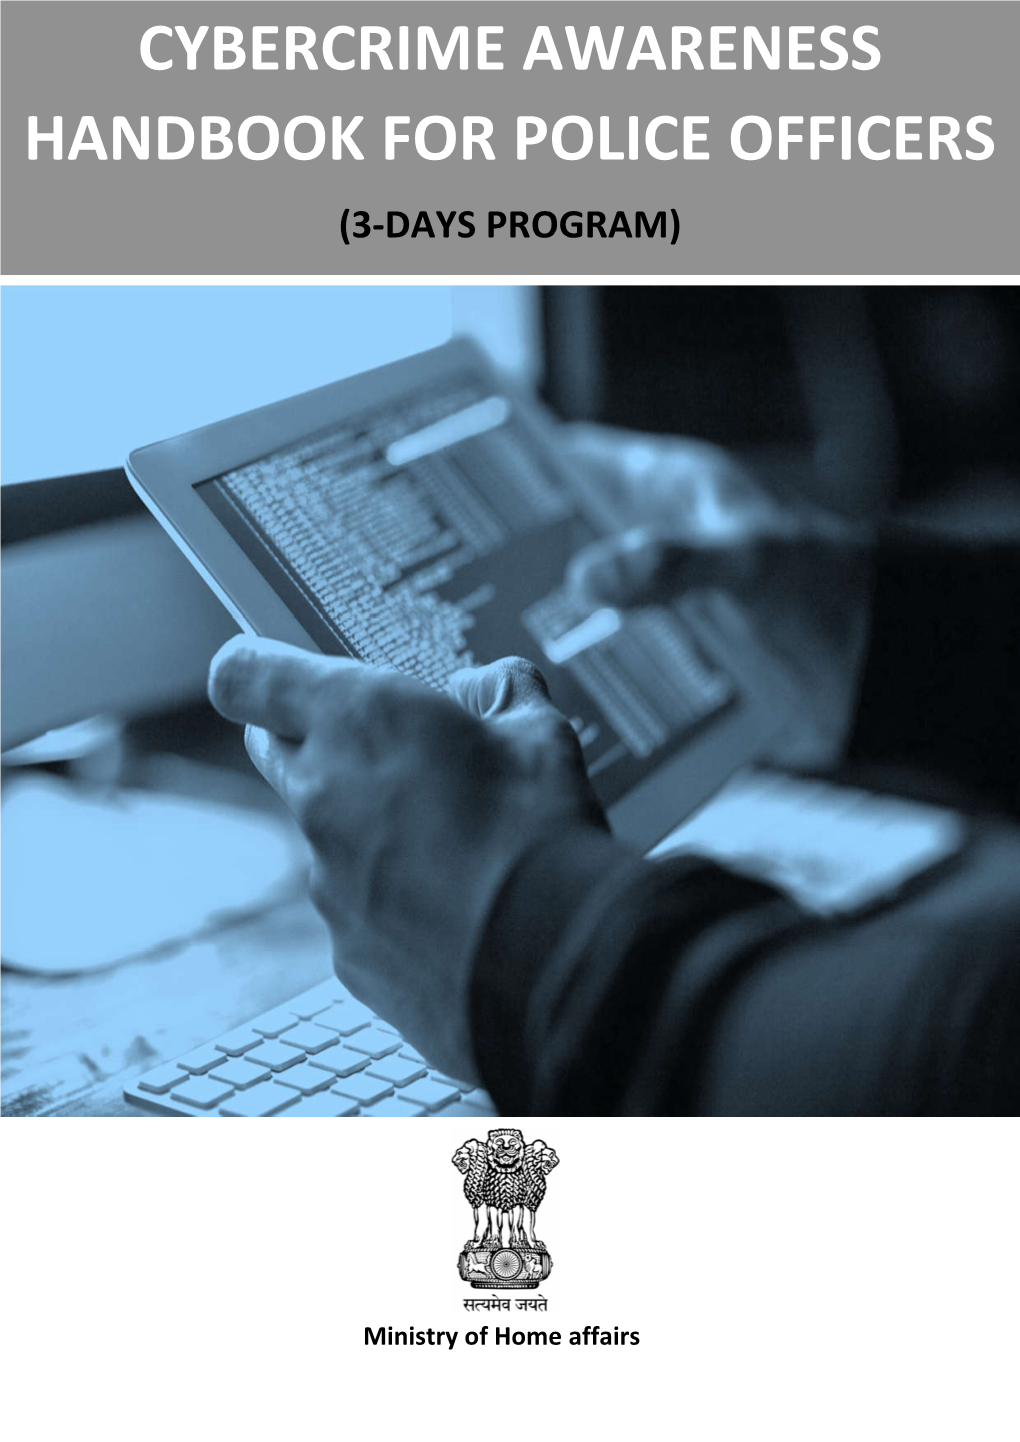 Cybercrime Awareness Handbook for Police Officers